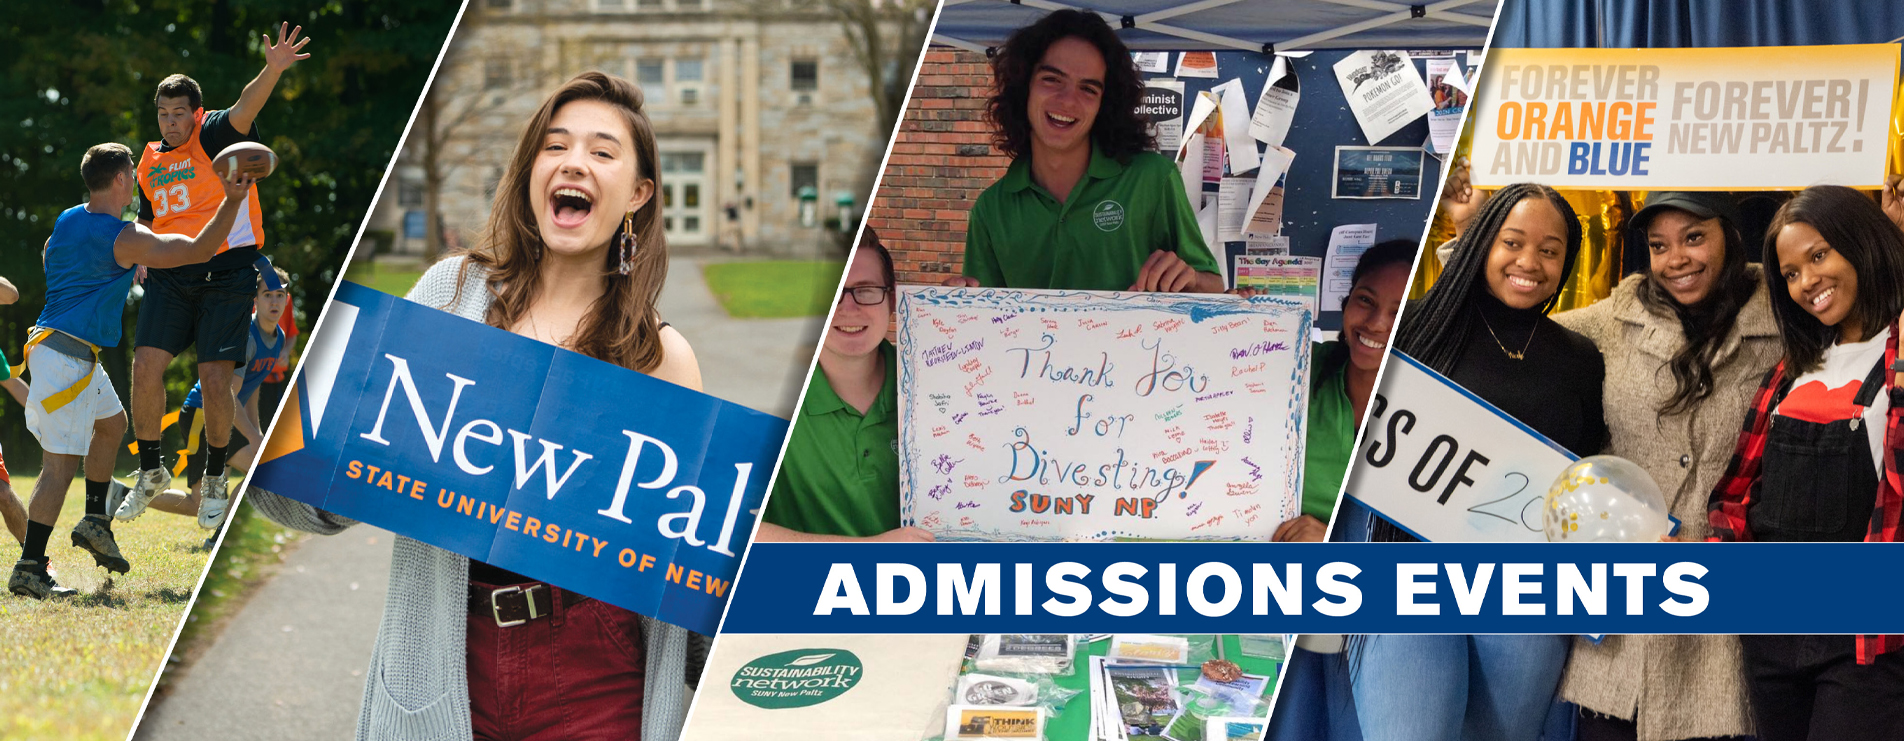 SUNY New Paltz Admission Events